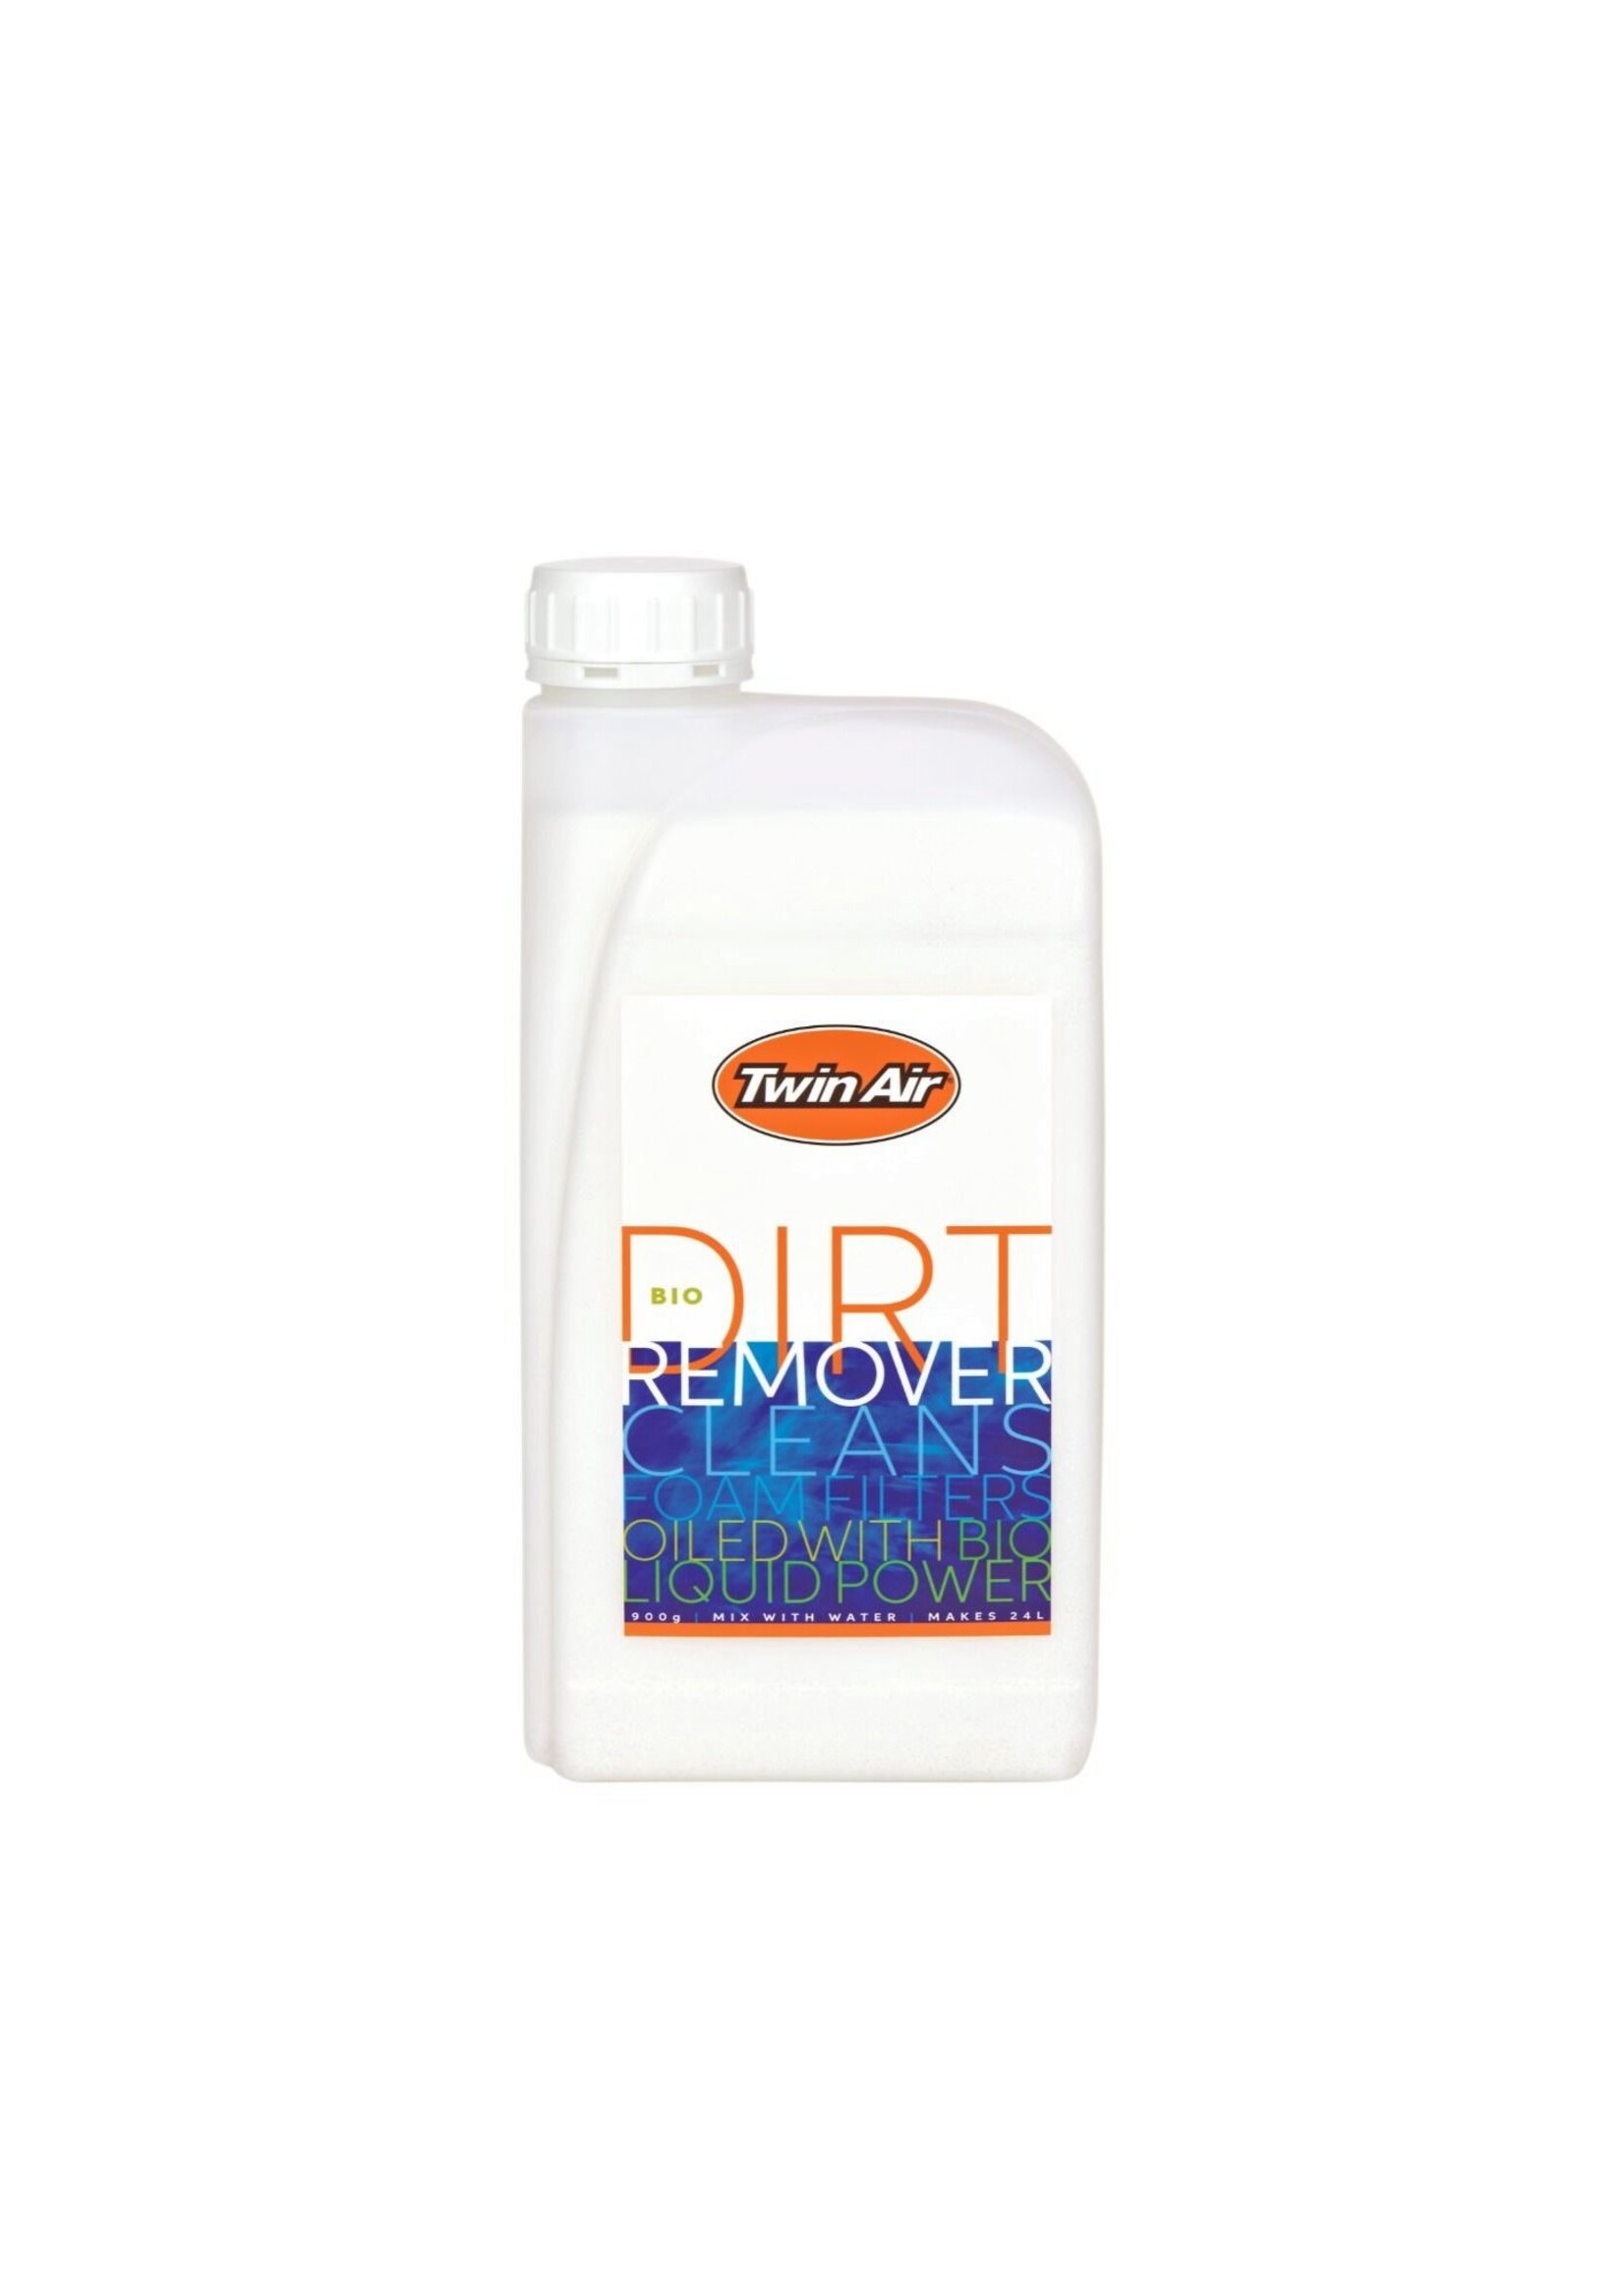 Twin Air Twin Air Dirt Remover/Cleaner Bio - 900g